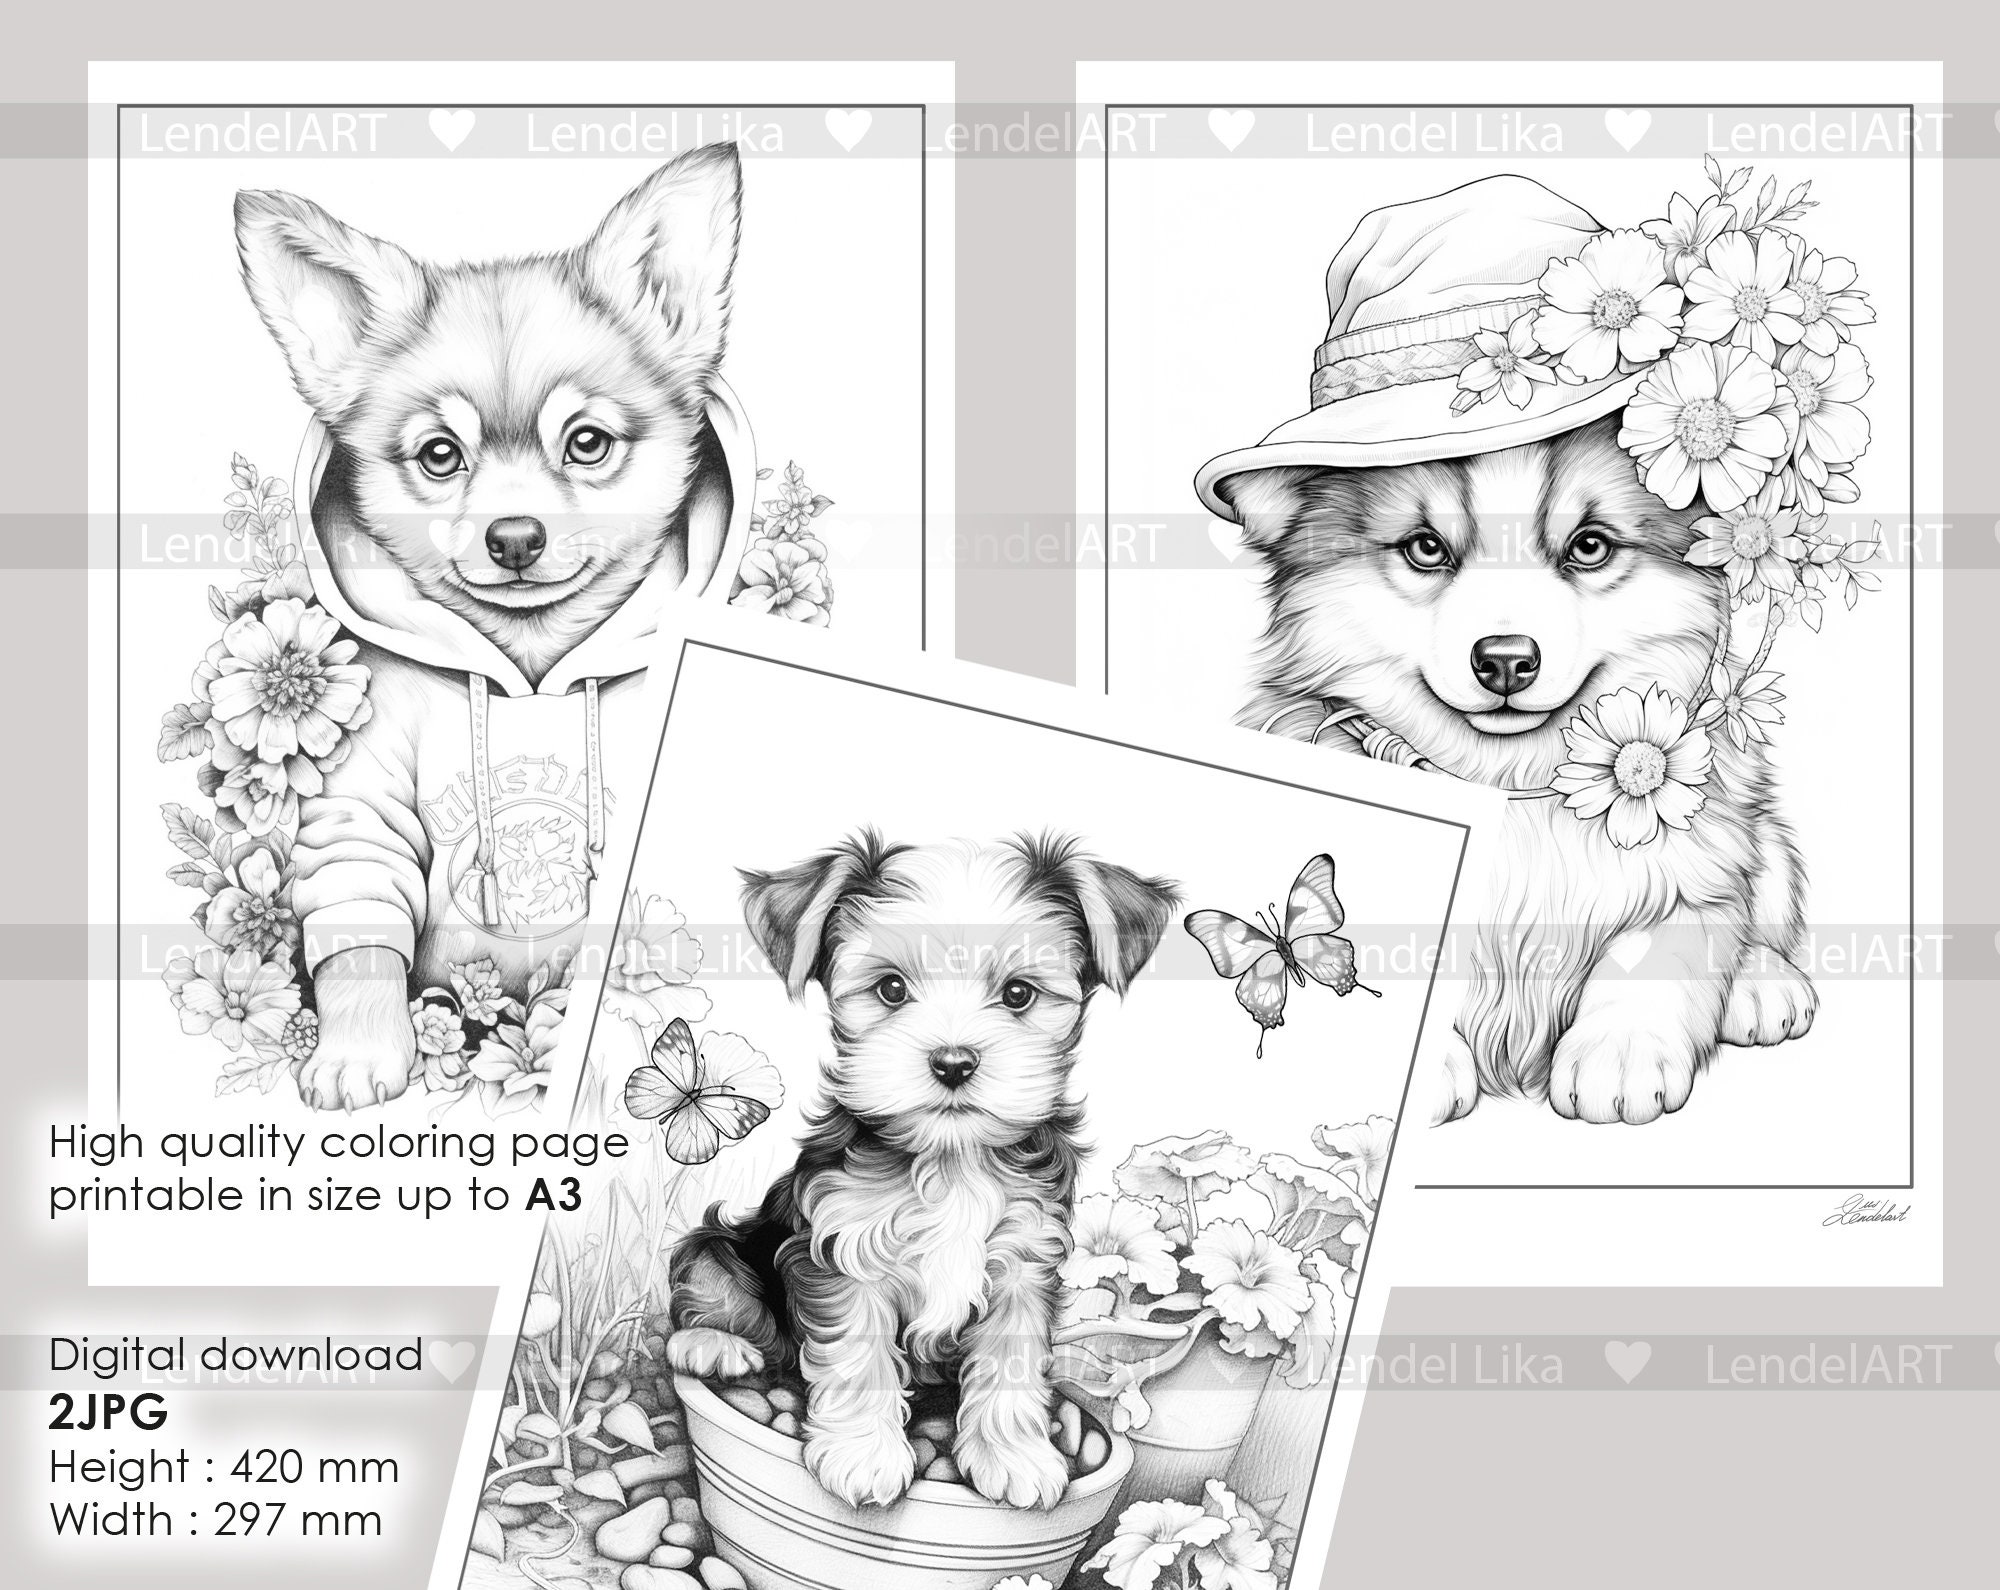 Puppy Foot Prints Sketchbook: 8x10 sketchbook for kids 121 blank white  pages with “This Sketchbook Belongs To”page